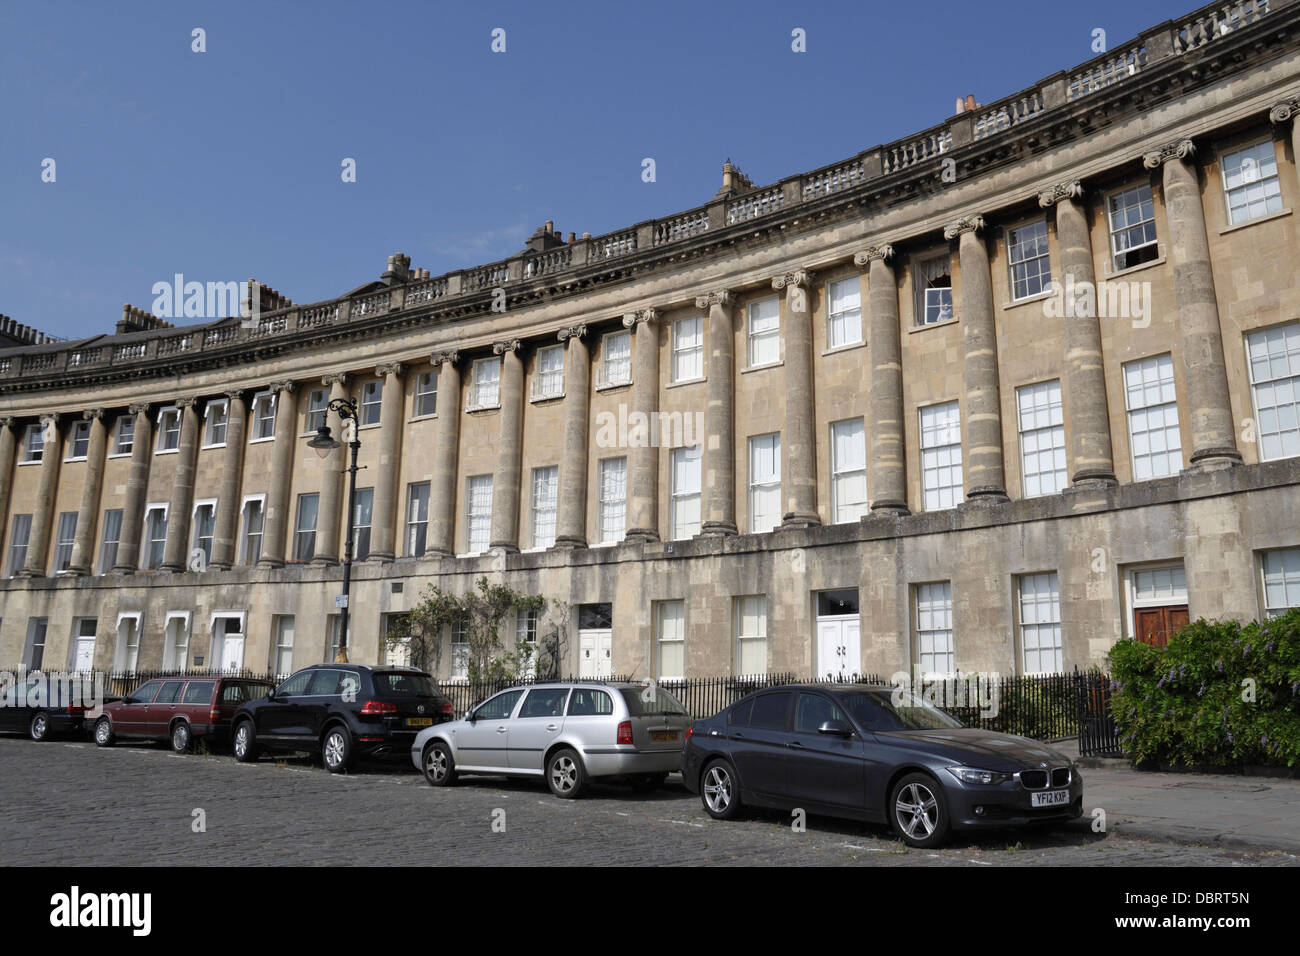 The Royal Crescent in Bath a Georgian crescent of houses England UK. Bath English townhouses World heritage Architecture Stock Photo